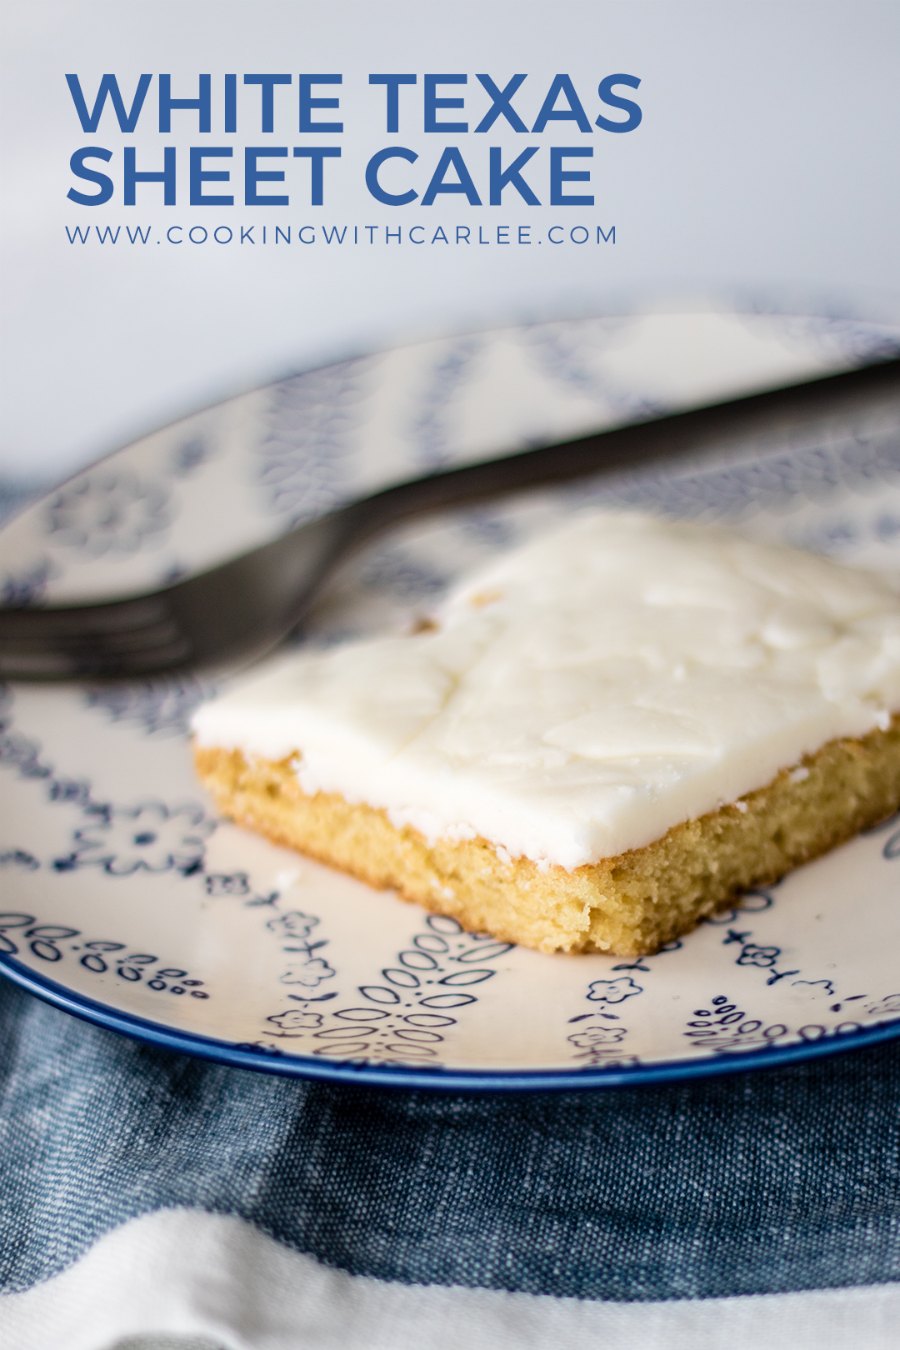 Make homemade white cake and white frosting in the simplest possible way! This cake is made like the chocolate Texas sheet cake, all in saucepans, but there's no chocolate in site.  